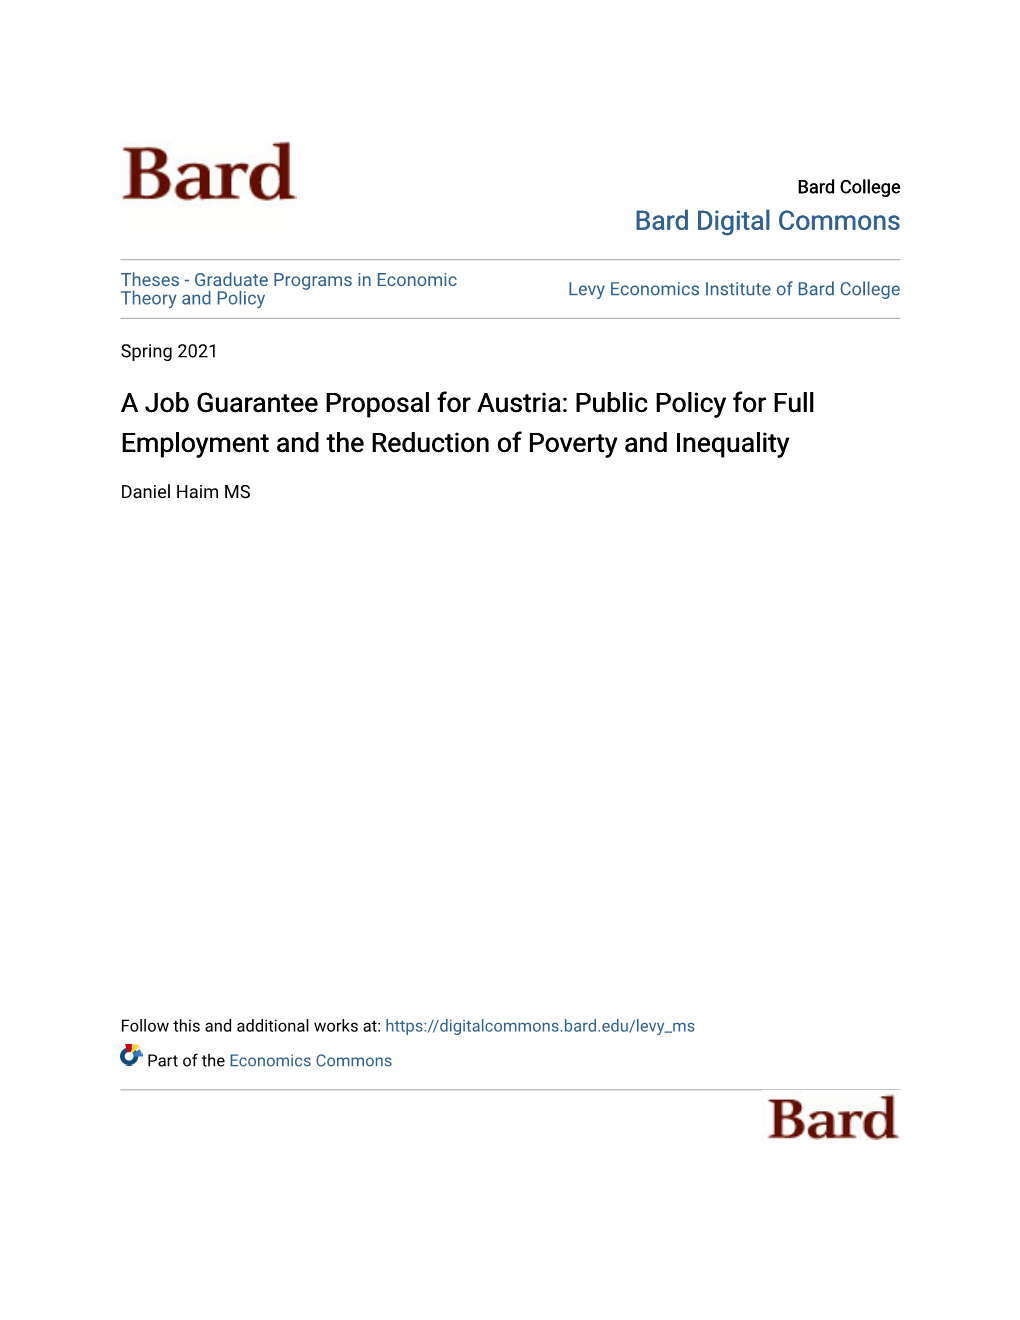 A Job Guarantee Proposal for Austria: Public Policy for Full Employment and the Reduction of Poverty and Inequality